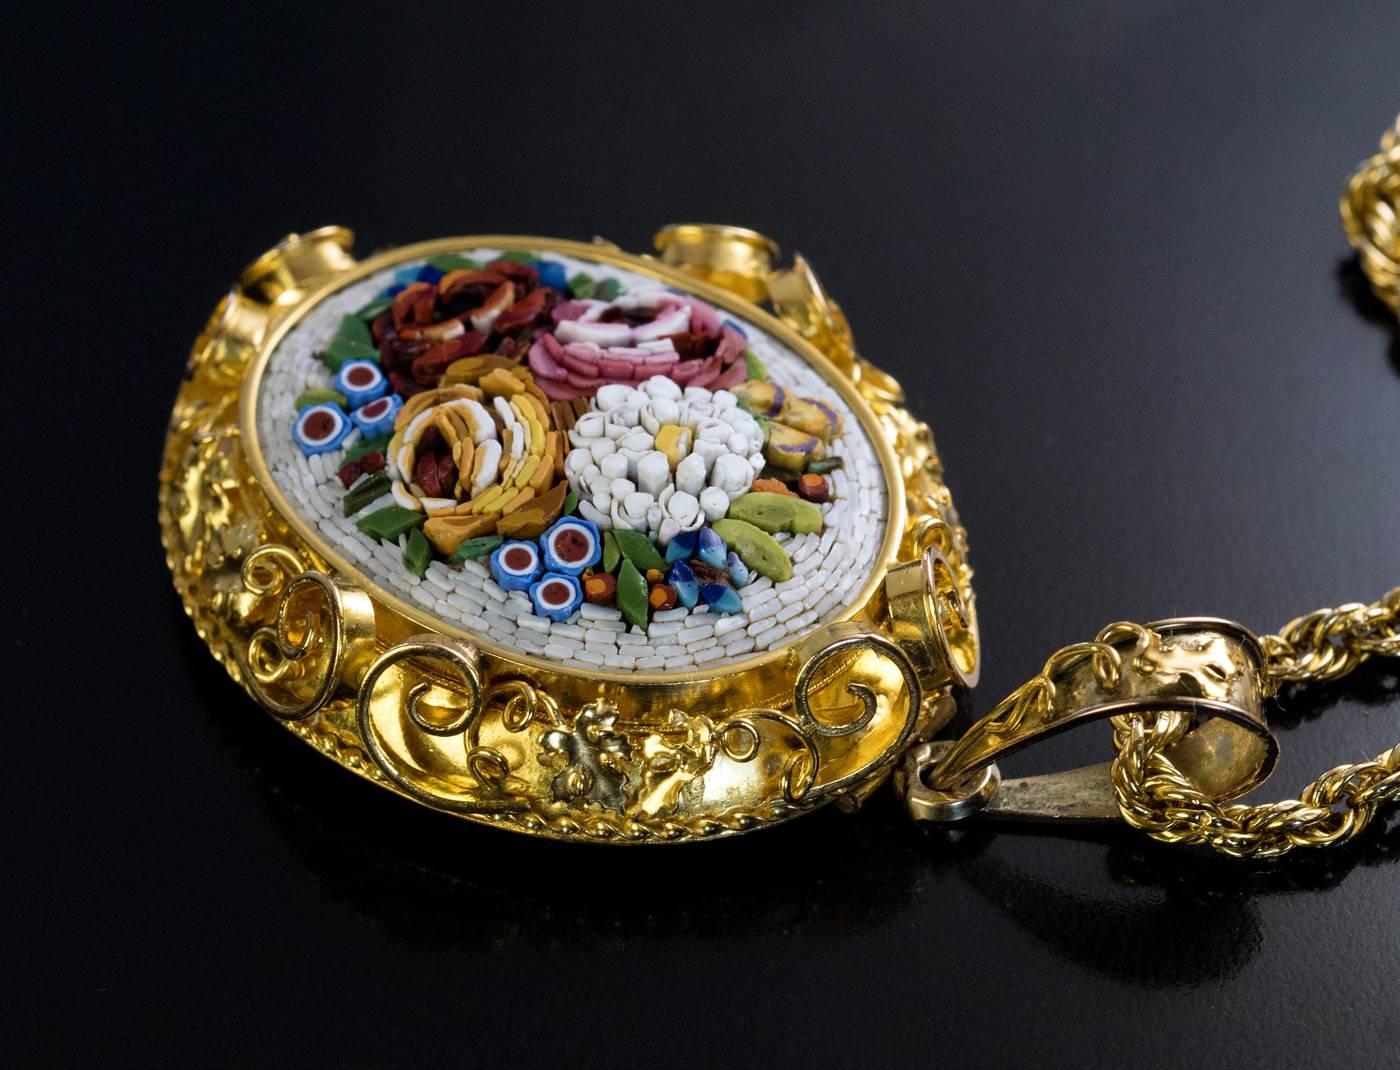 Italy, circa 1870

This antique Victorian 14K gold necklace features a large and very fine Roman micro mosaic floral bouquet. The micro mosaic plaque is set in an ornate gold frame with applied gold scrolls and grapevine leaves.

The back of the